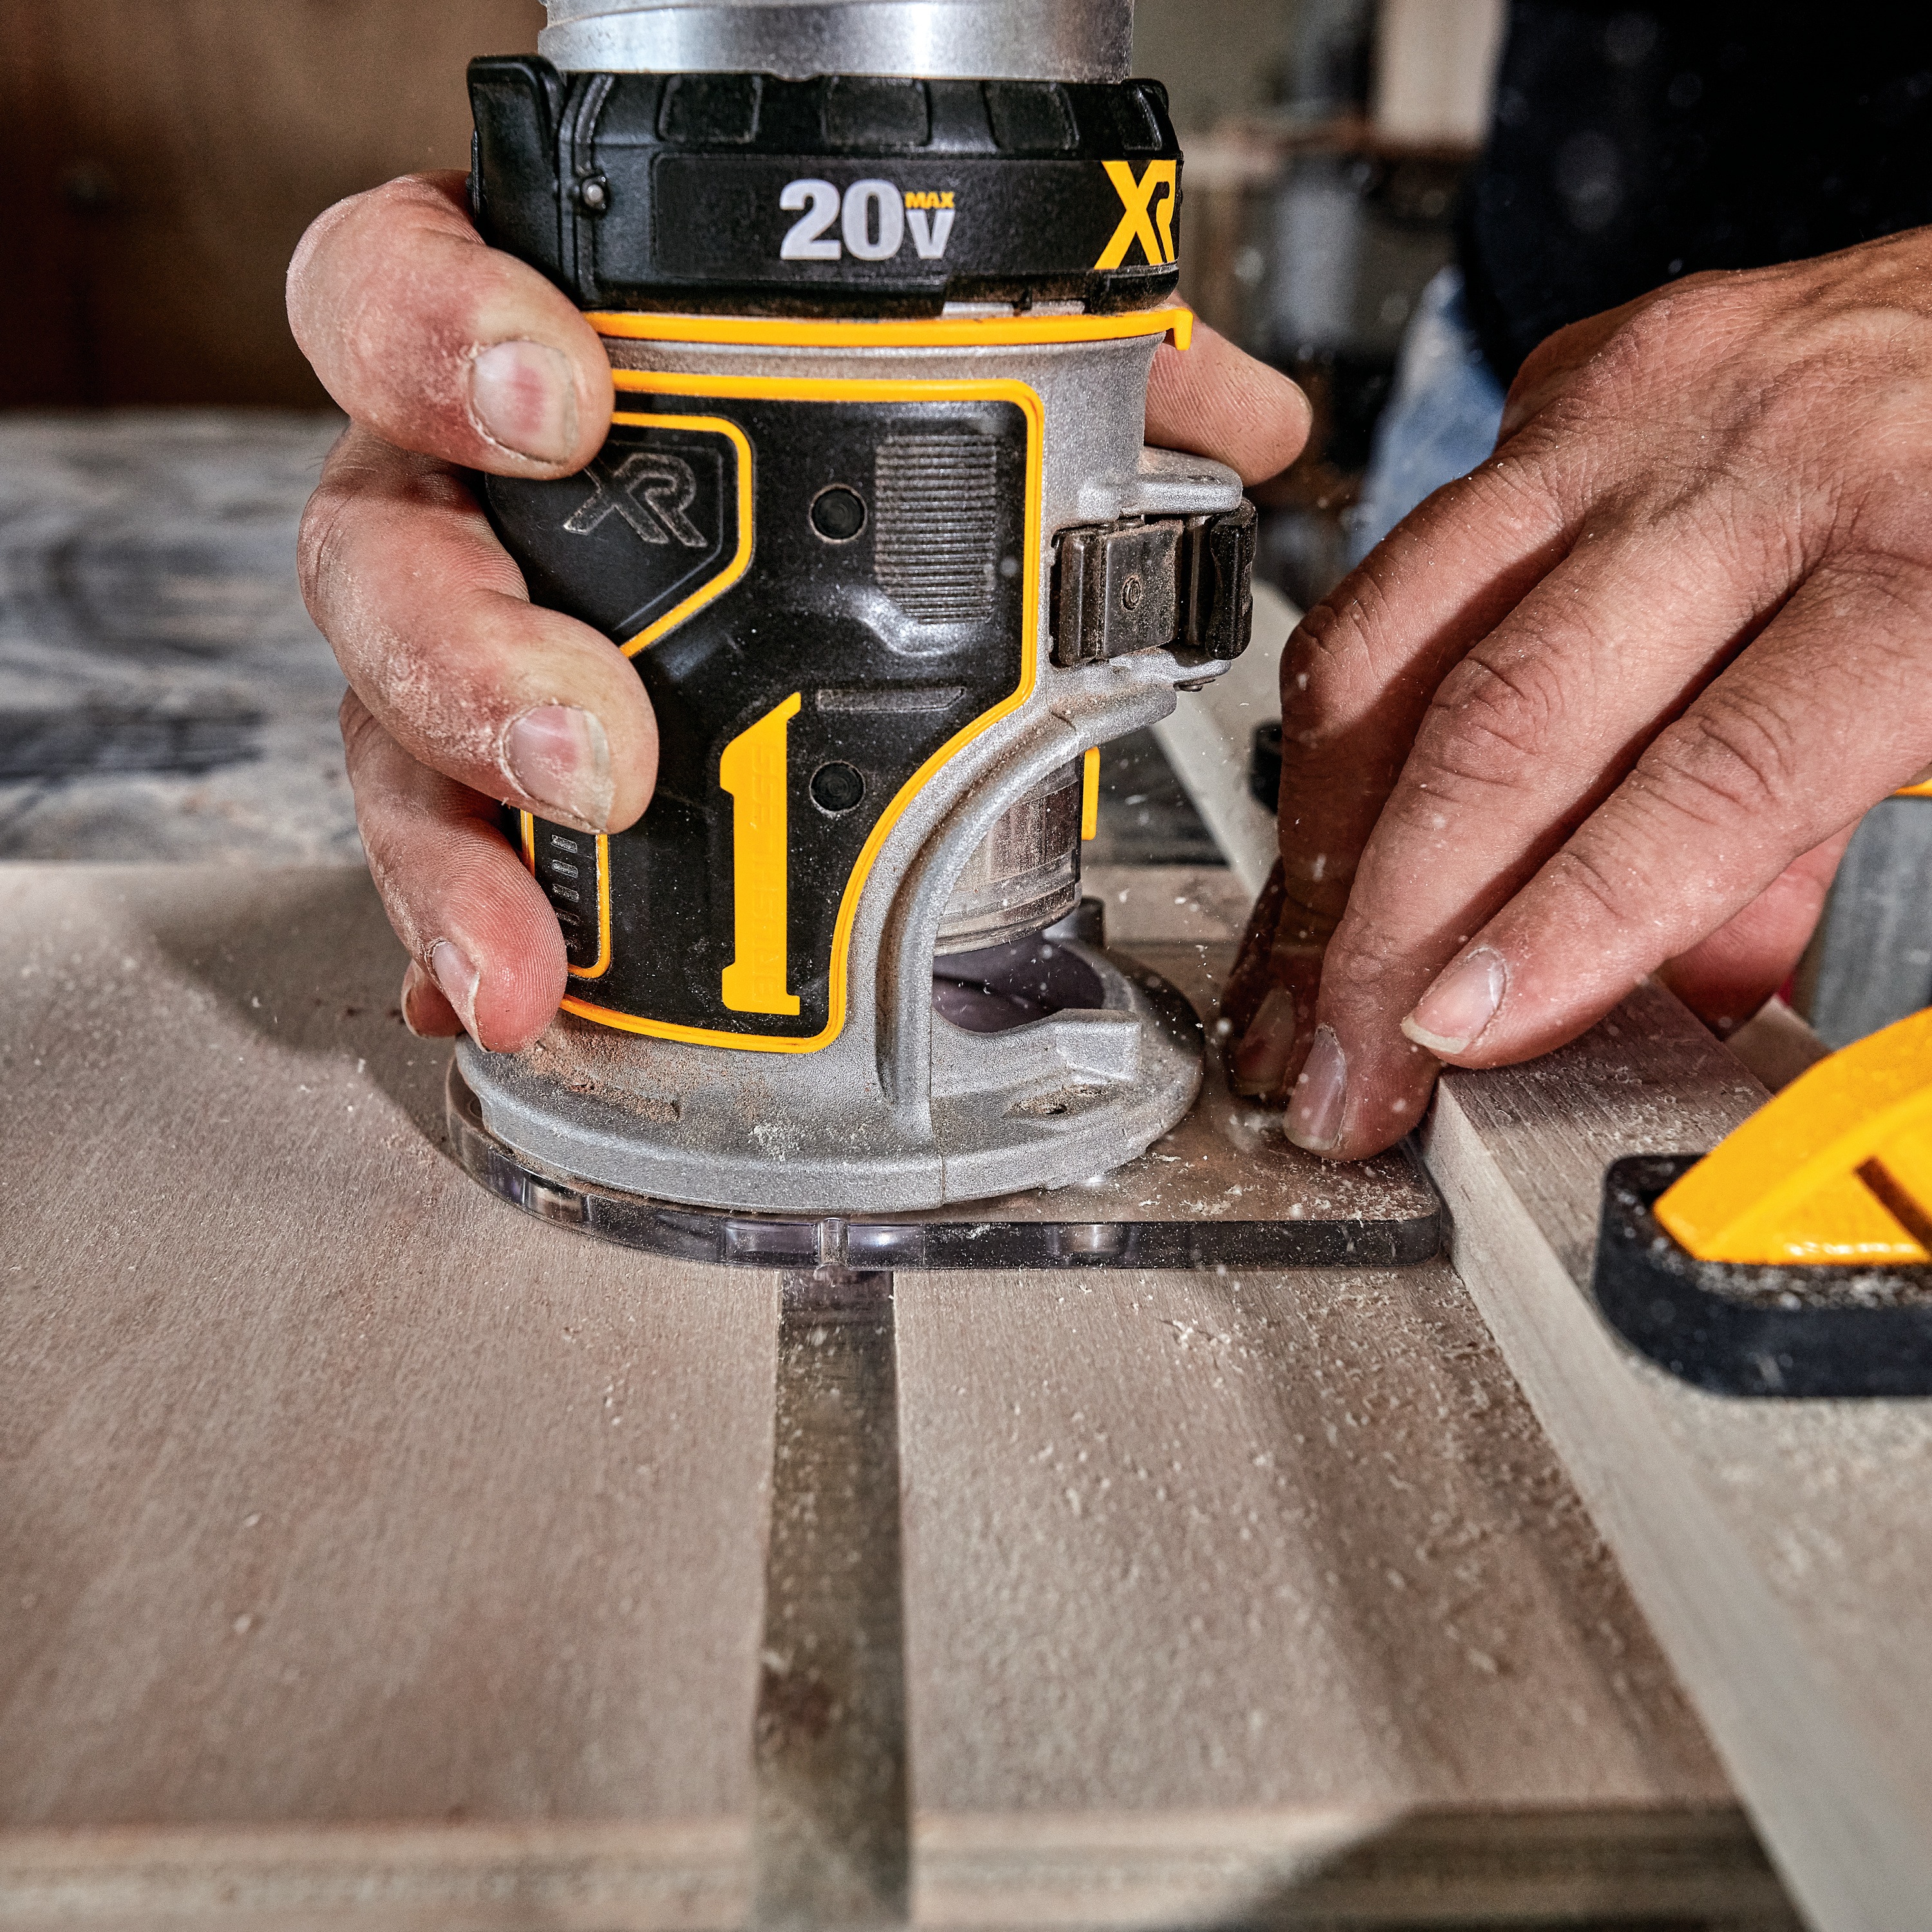 profile of Brushless Cordless Compact Router.